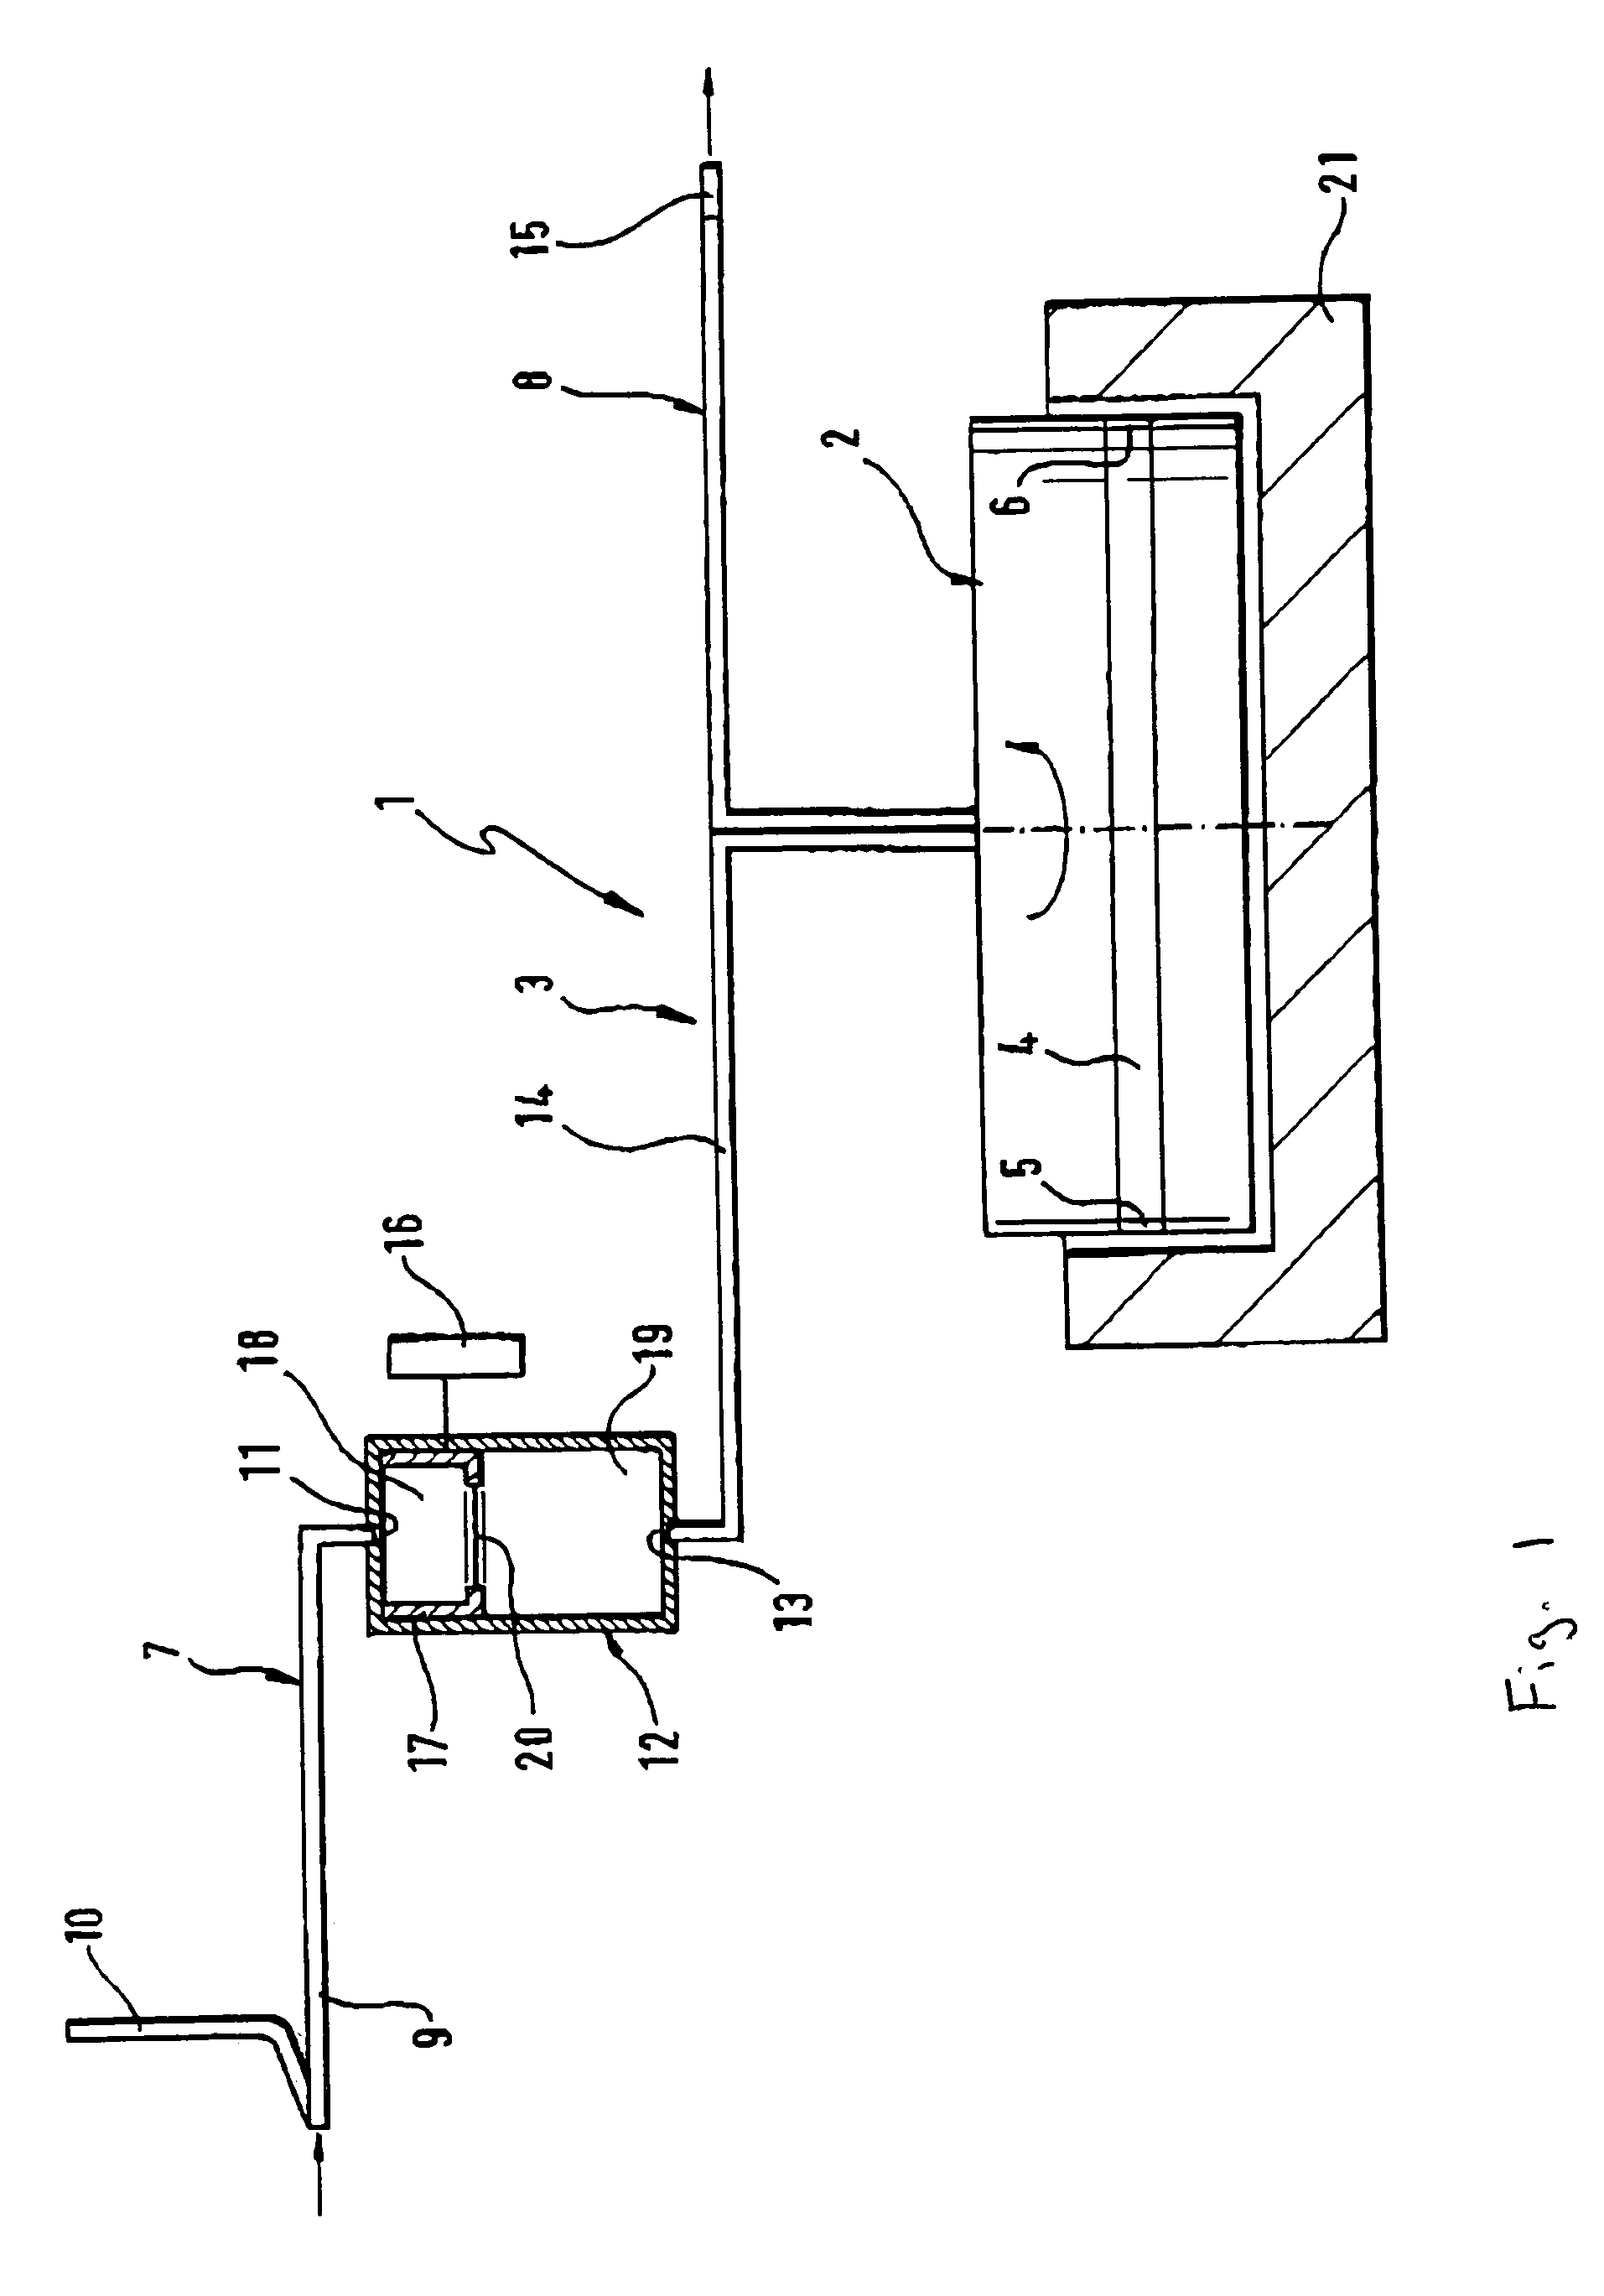 Device and method for autologous blood transfusion